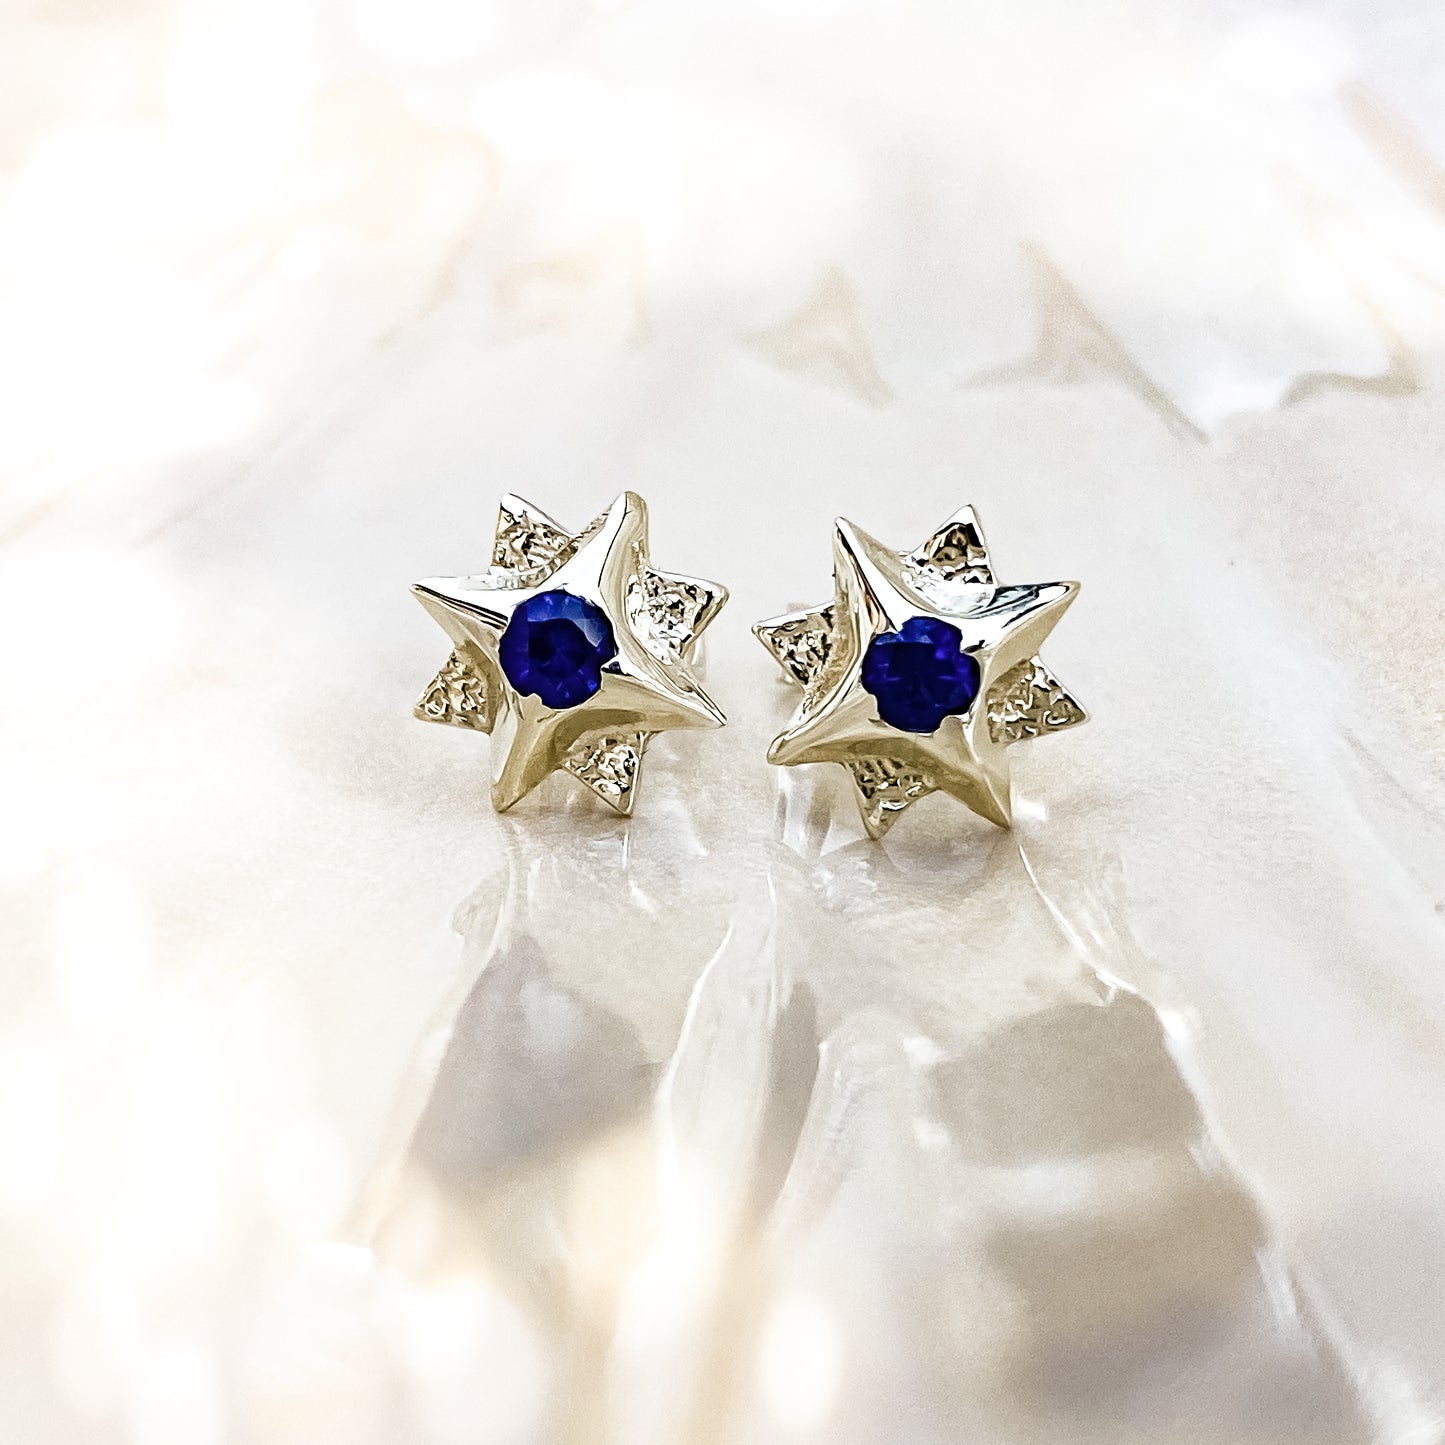 White Gold North Star Stud Earrings with Sapphire